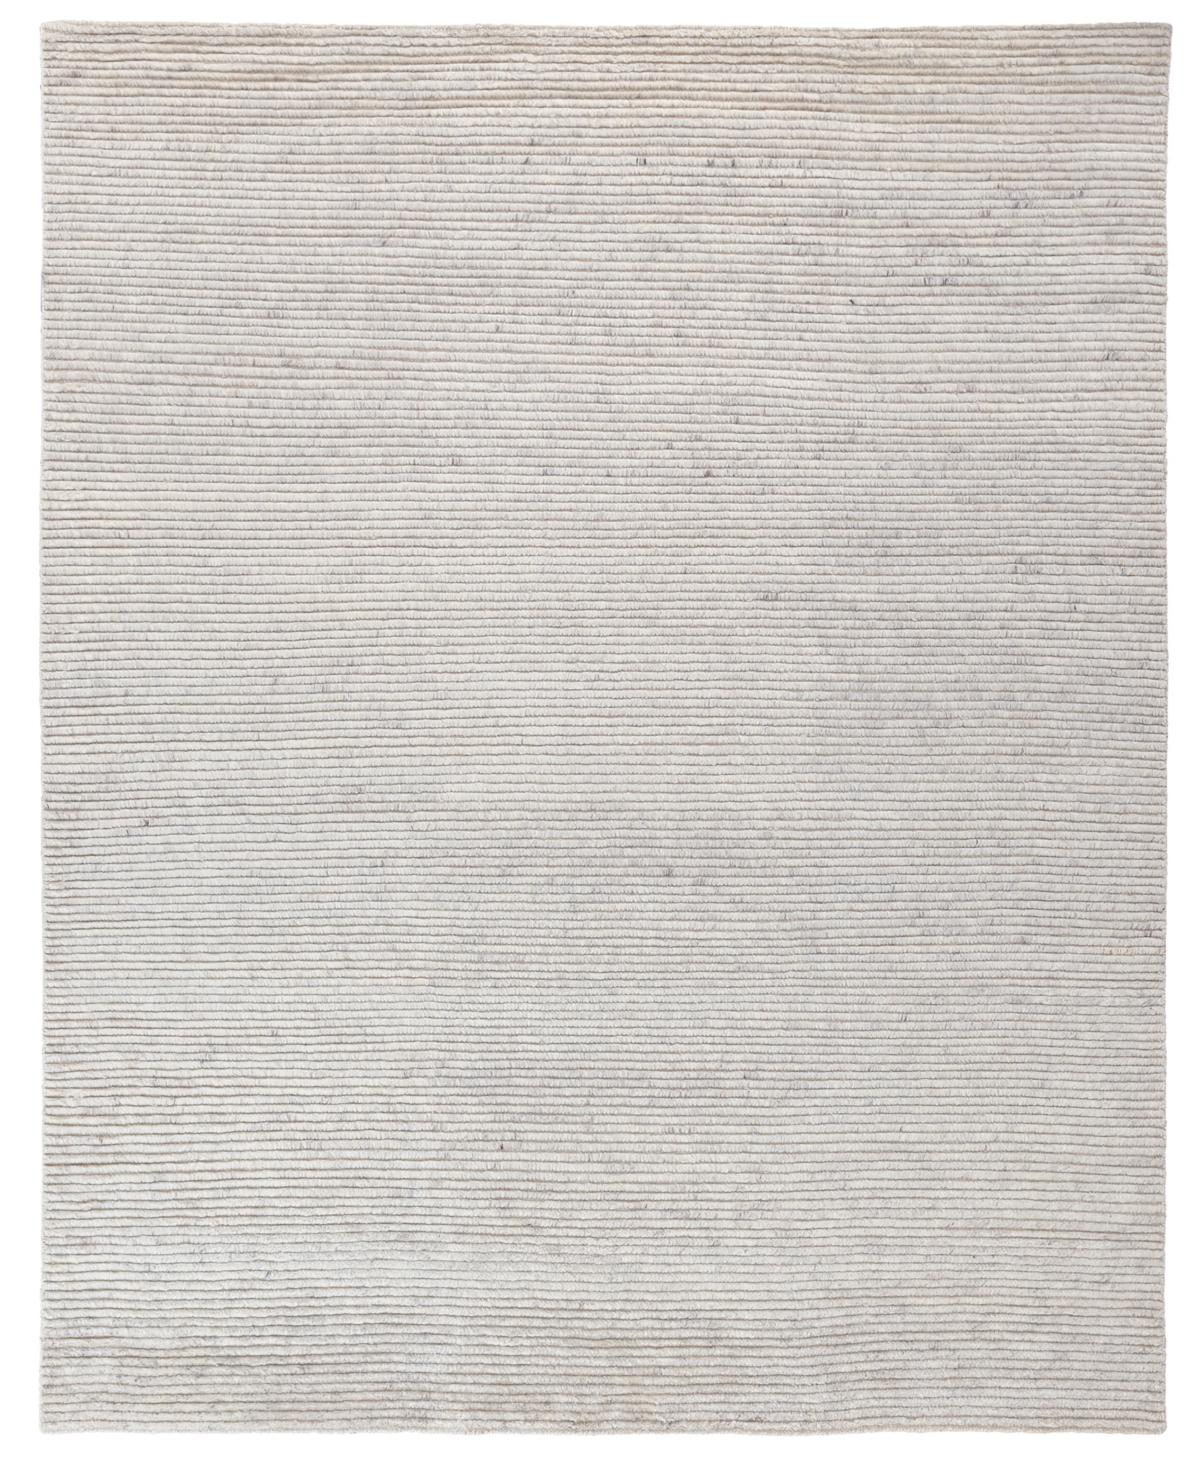 Exquisite Rugs Kaza Er4102 6' X 9' Area Rug In Silver Tone